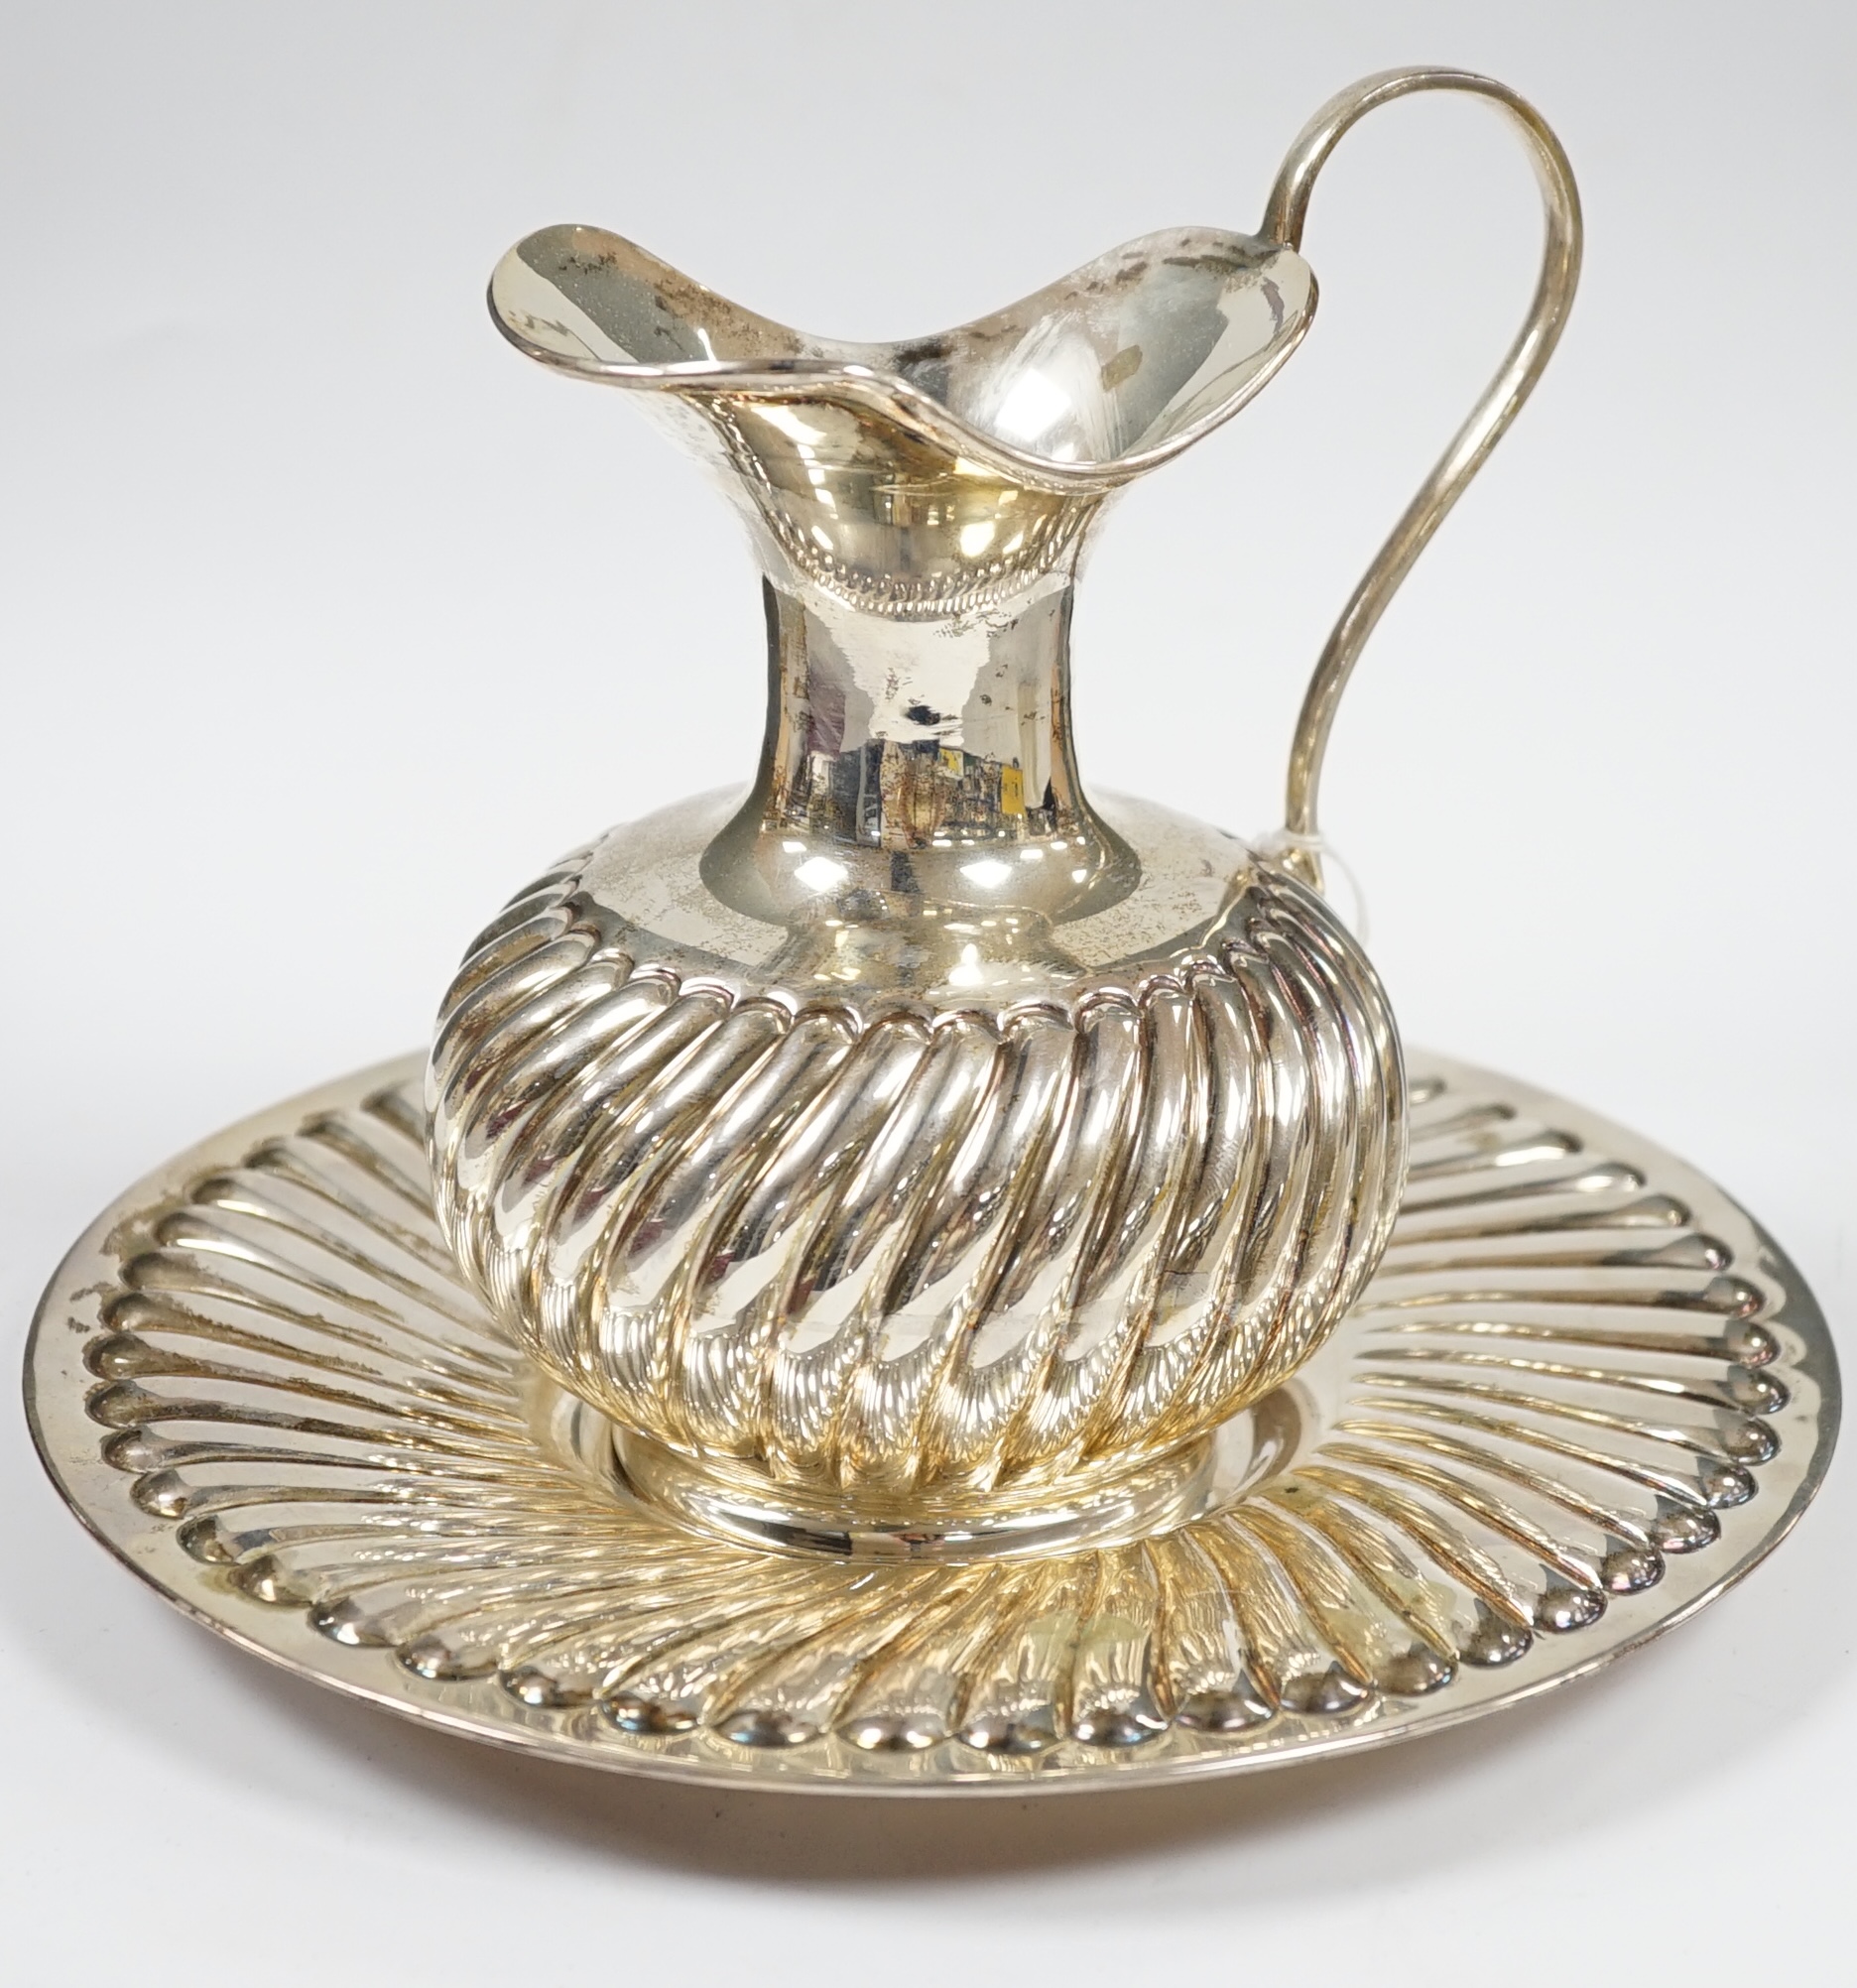 A modern 925 ewer and stand, with wrythened fluted decoration, stand diameter 22.3cm, 18.2oz. Condition - fair